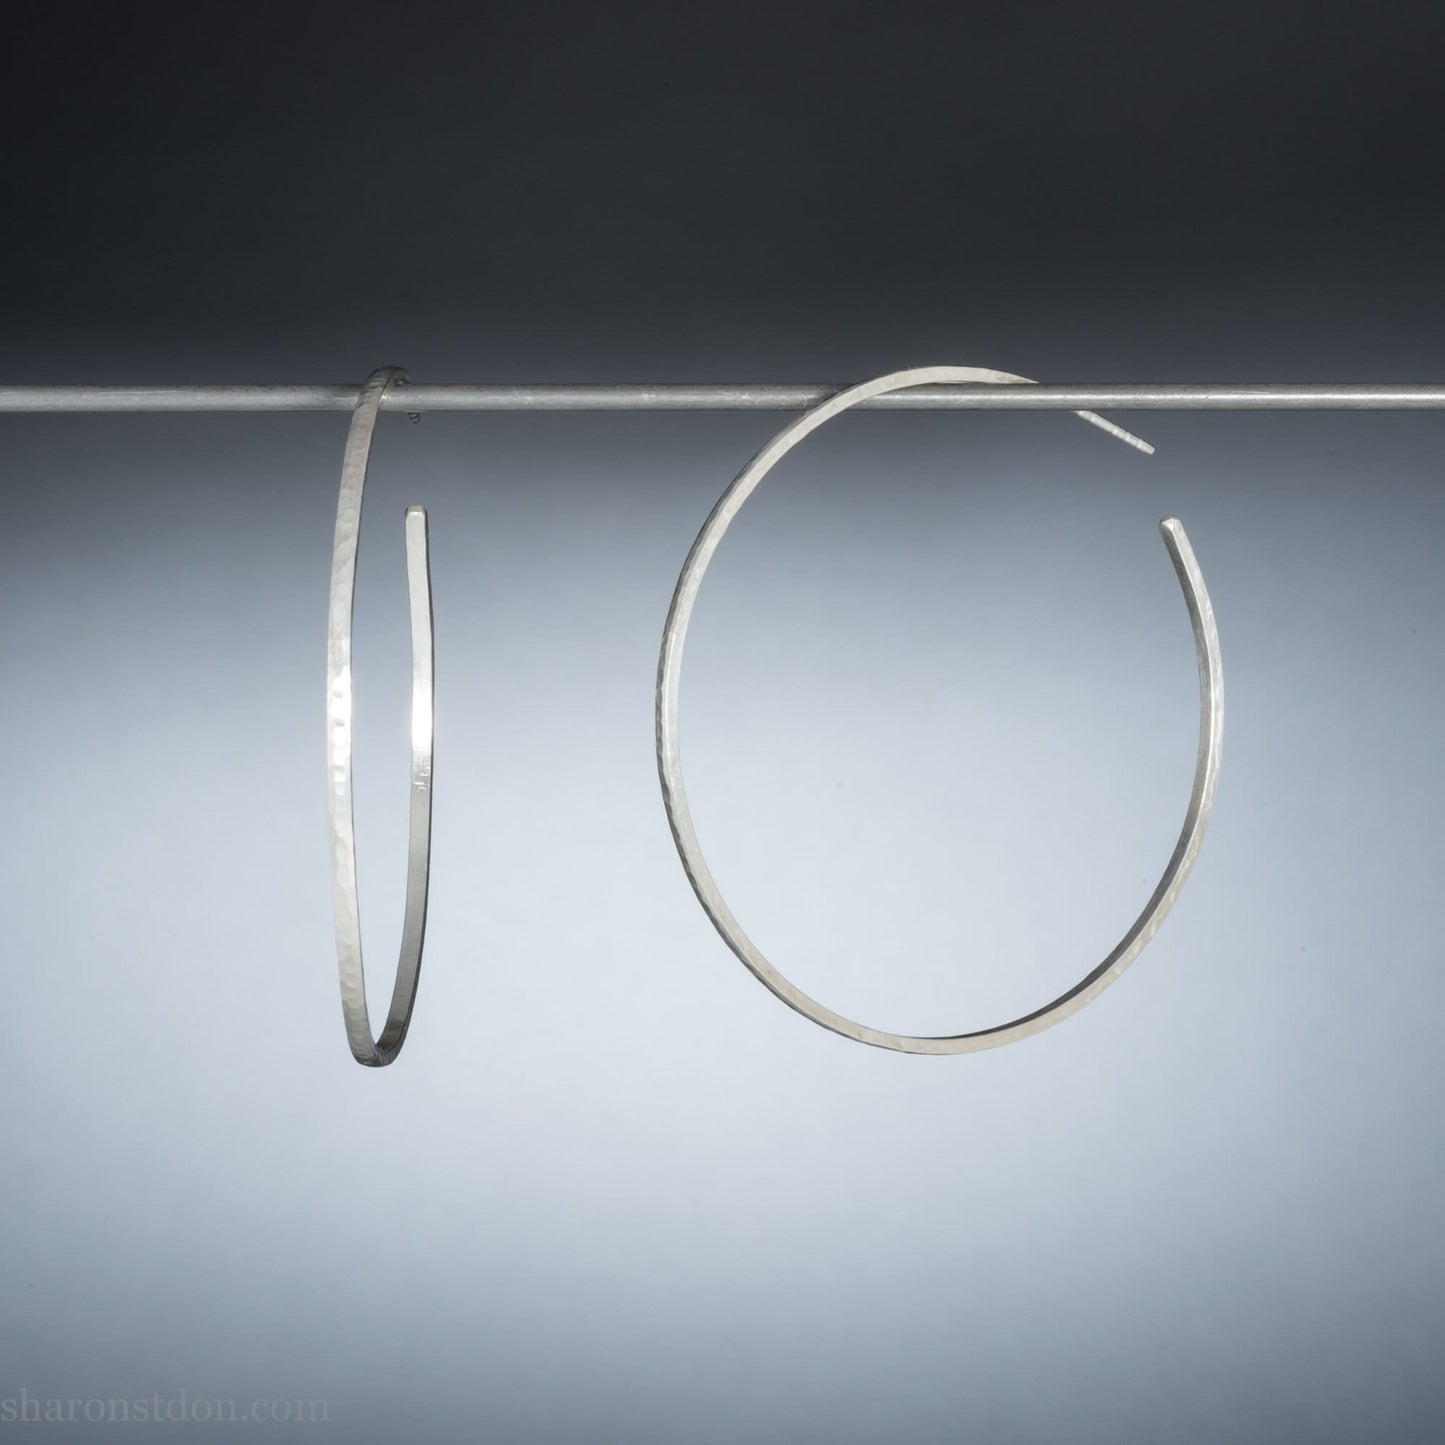 handmade 925 sterling silver hoop earrings for women. Comfortable, lightweight, daily wear earrings with a hammered, wavy texture.